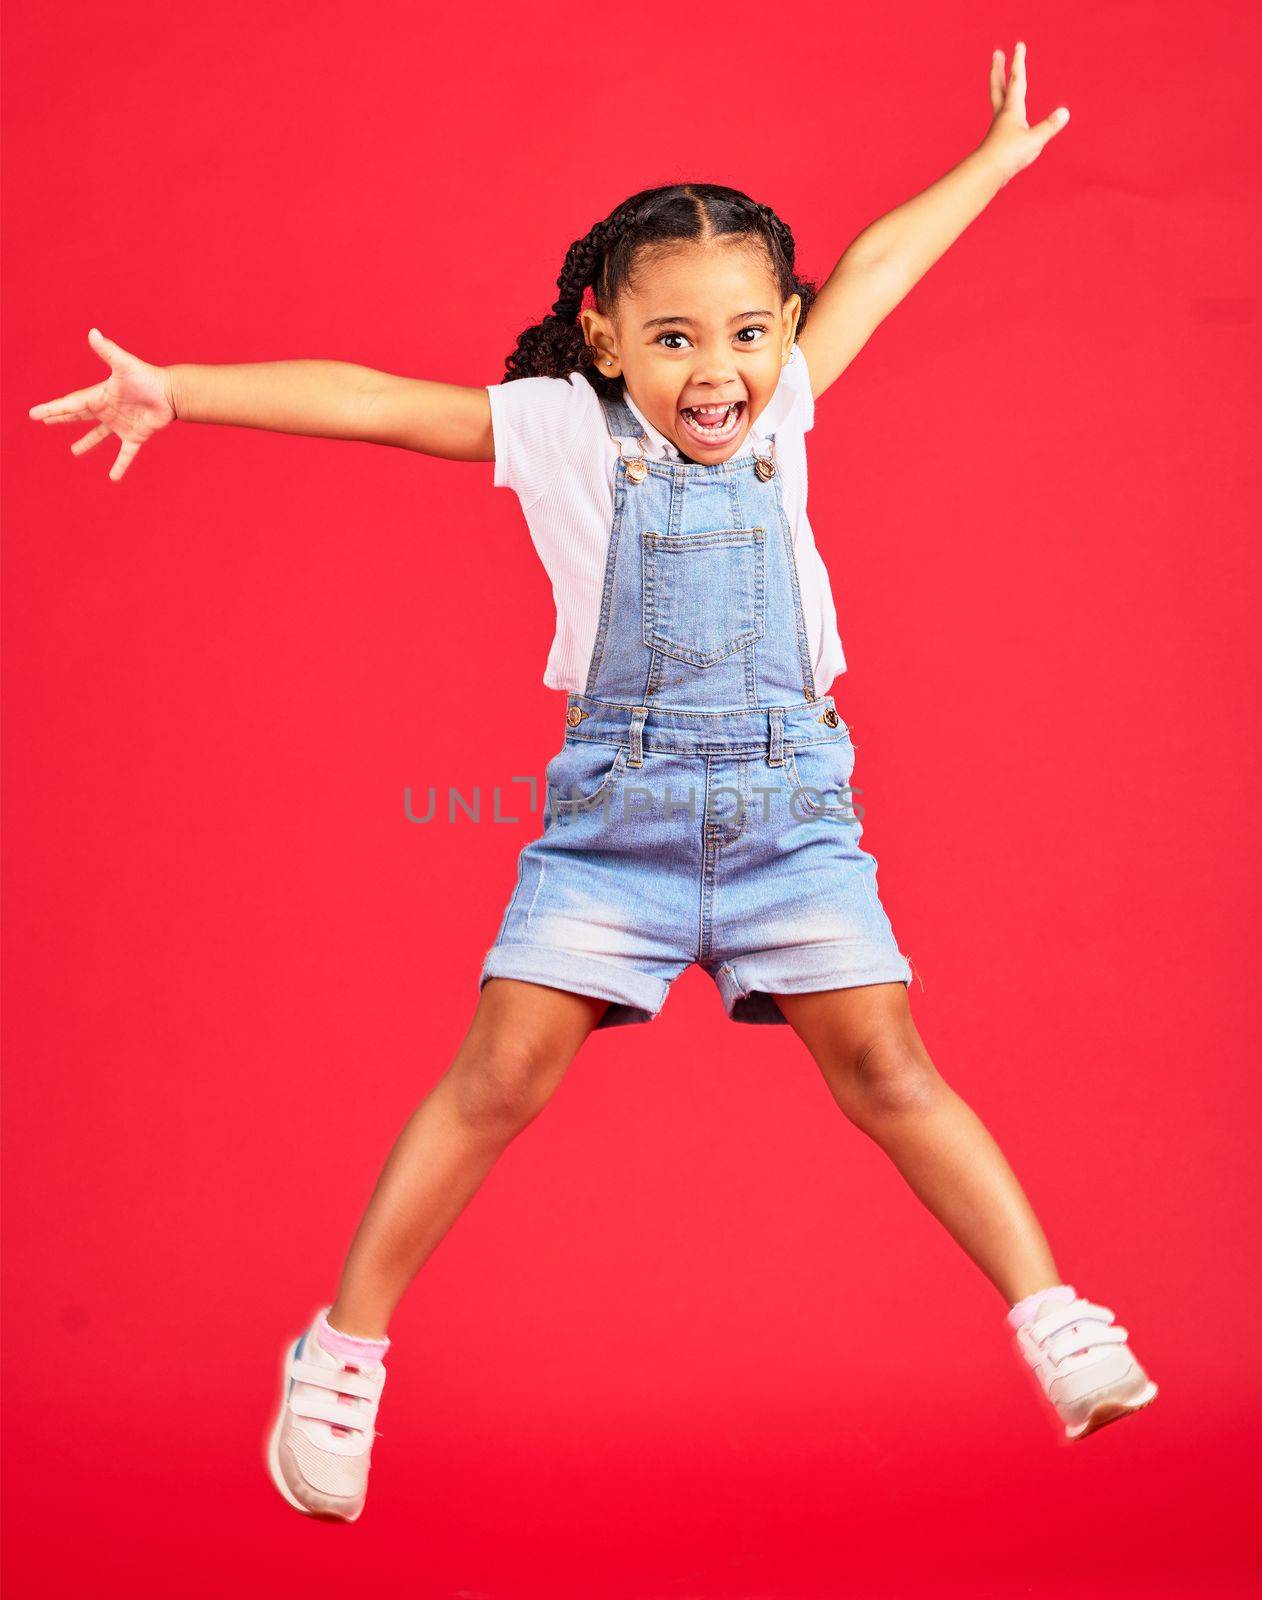 Excited, playful and portrait of a girl jumping while isolated on a red background in a studio. Youth, smile and child with freedom, energy and happiness while playing with a jump on a backdrop.